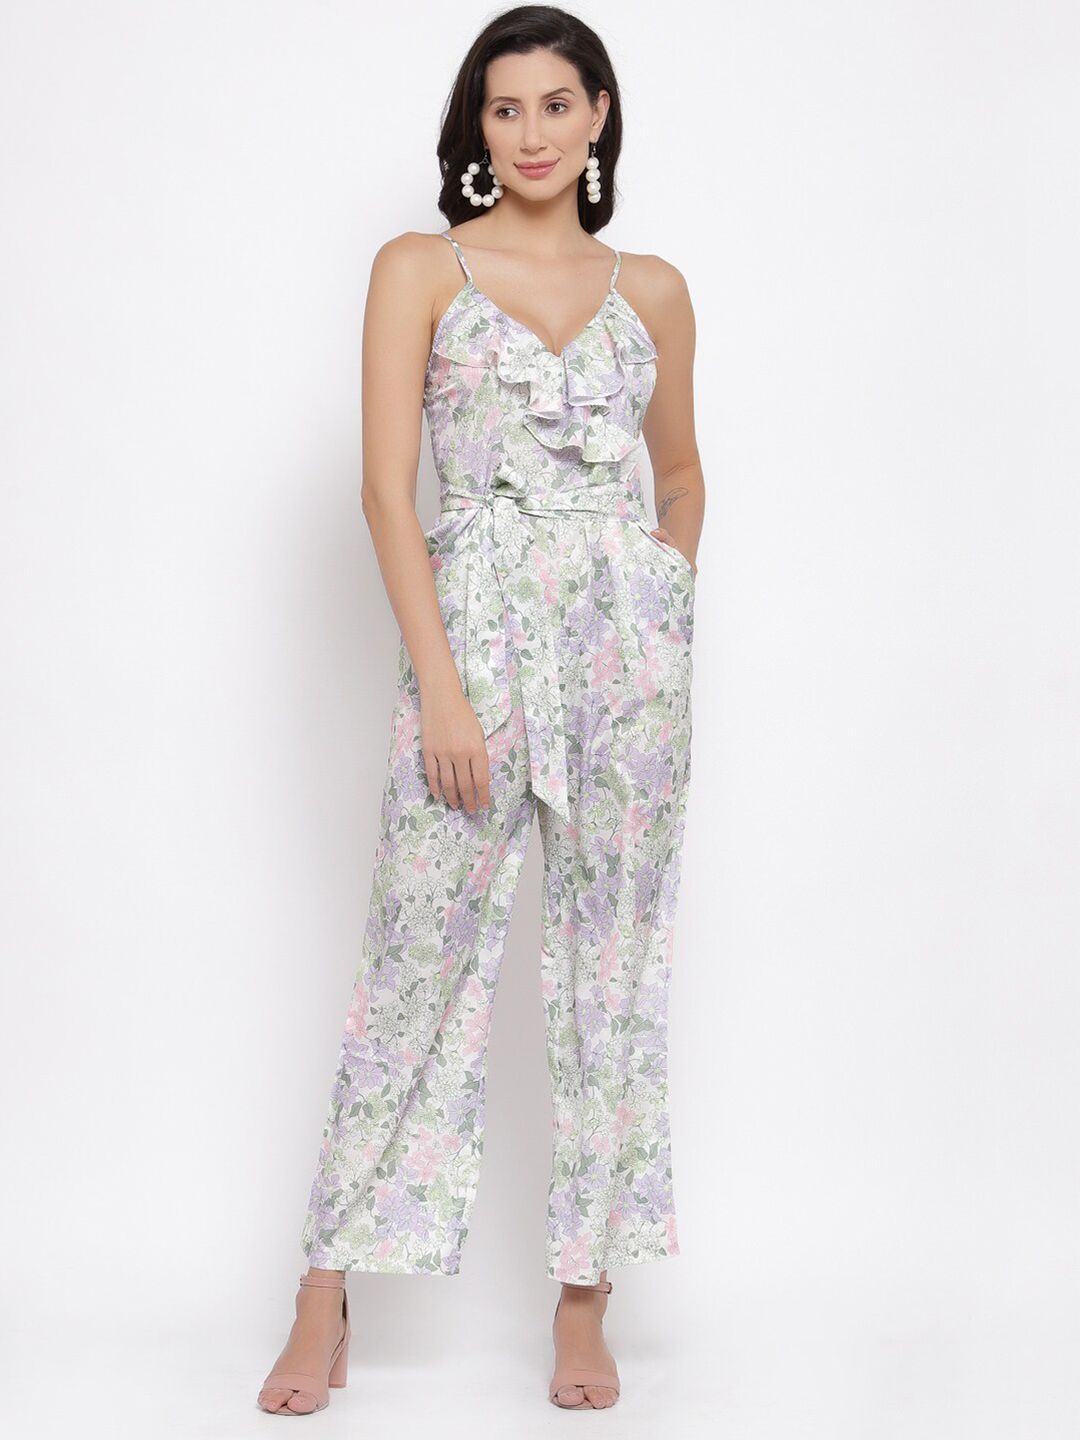 iki chic Off White & Green Printed Culotte Jumpsuit with Ruffles Price in India